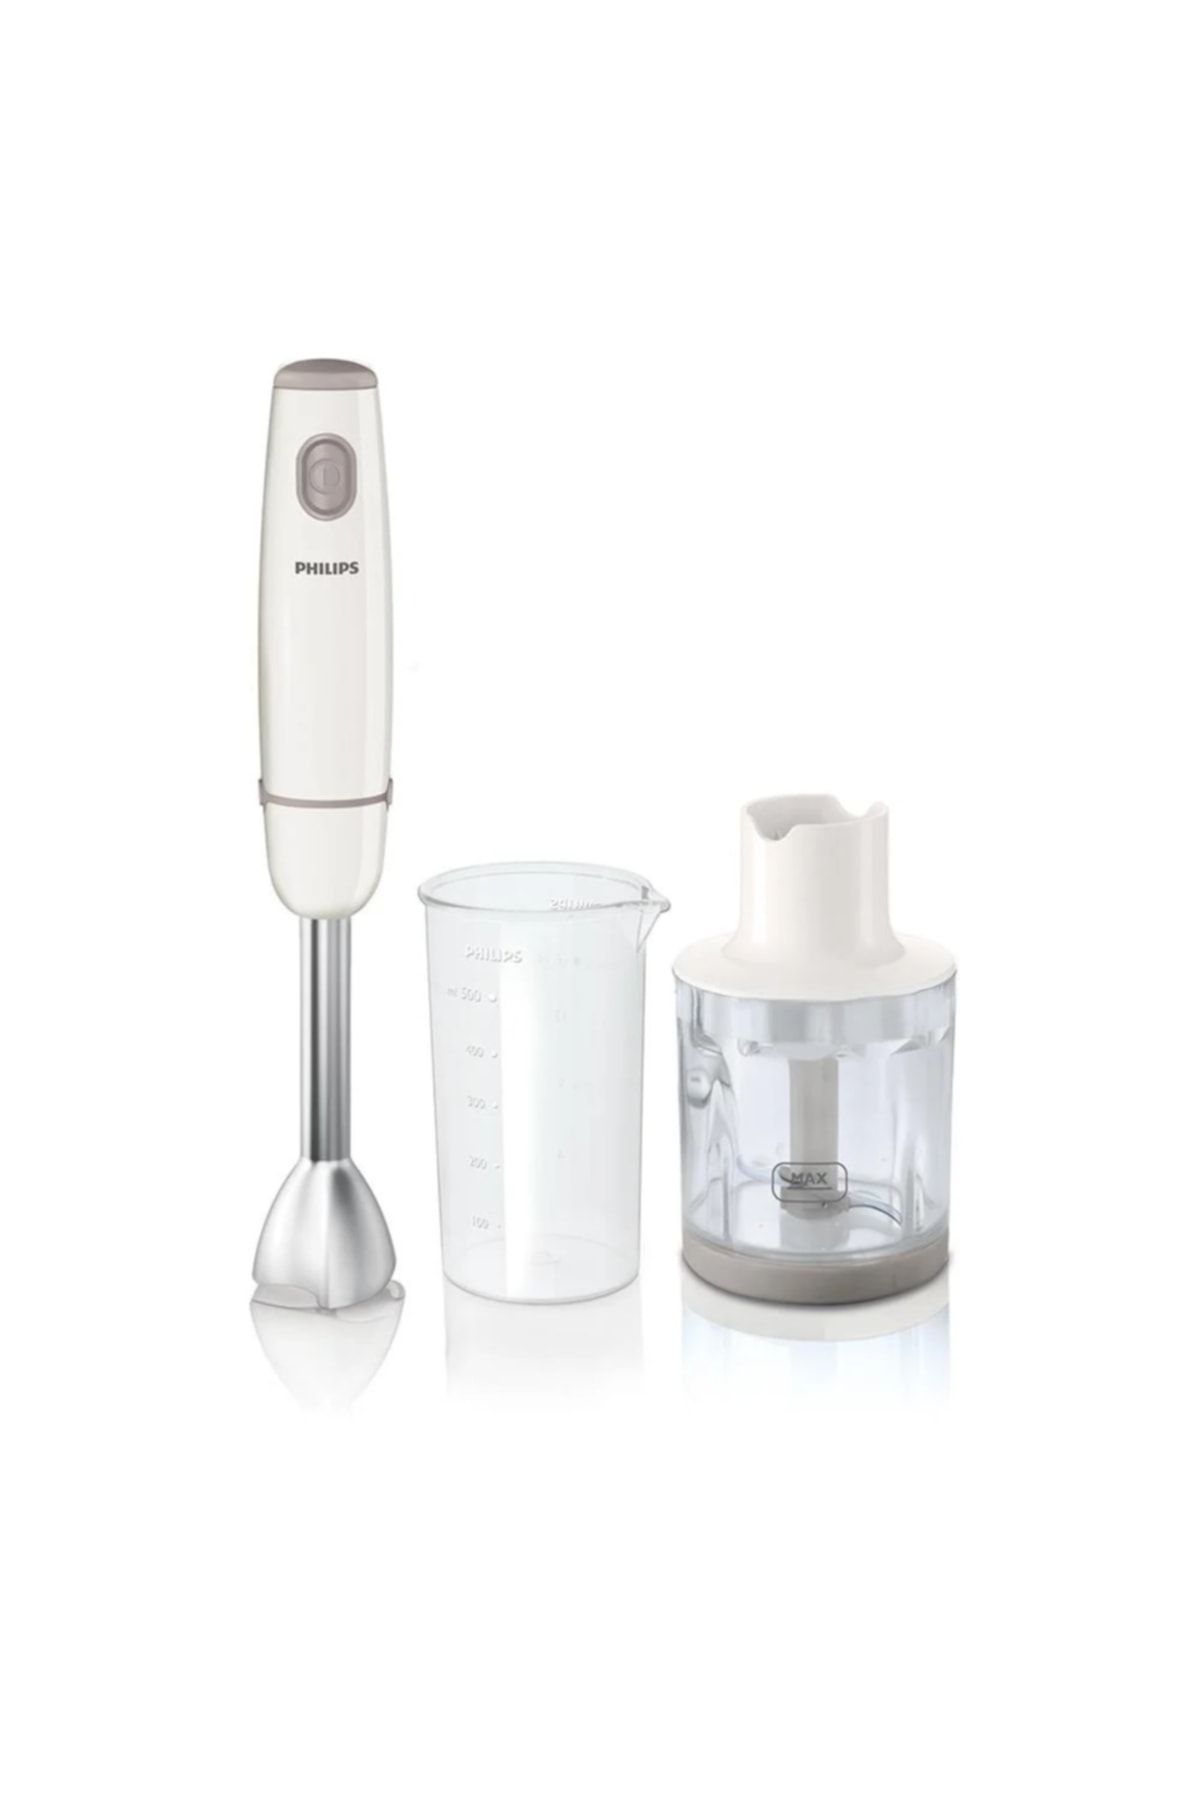 Philips Hr1605/00 Daily Collection 550 W Blender